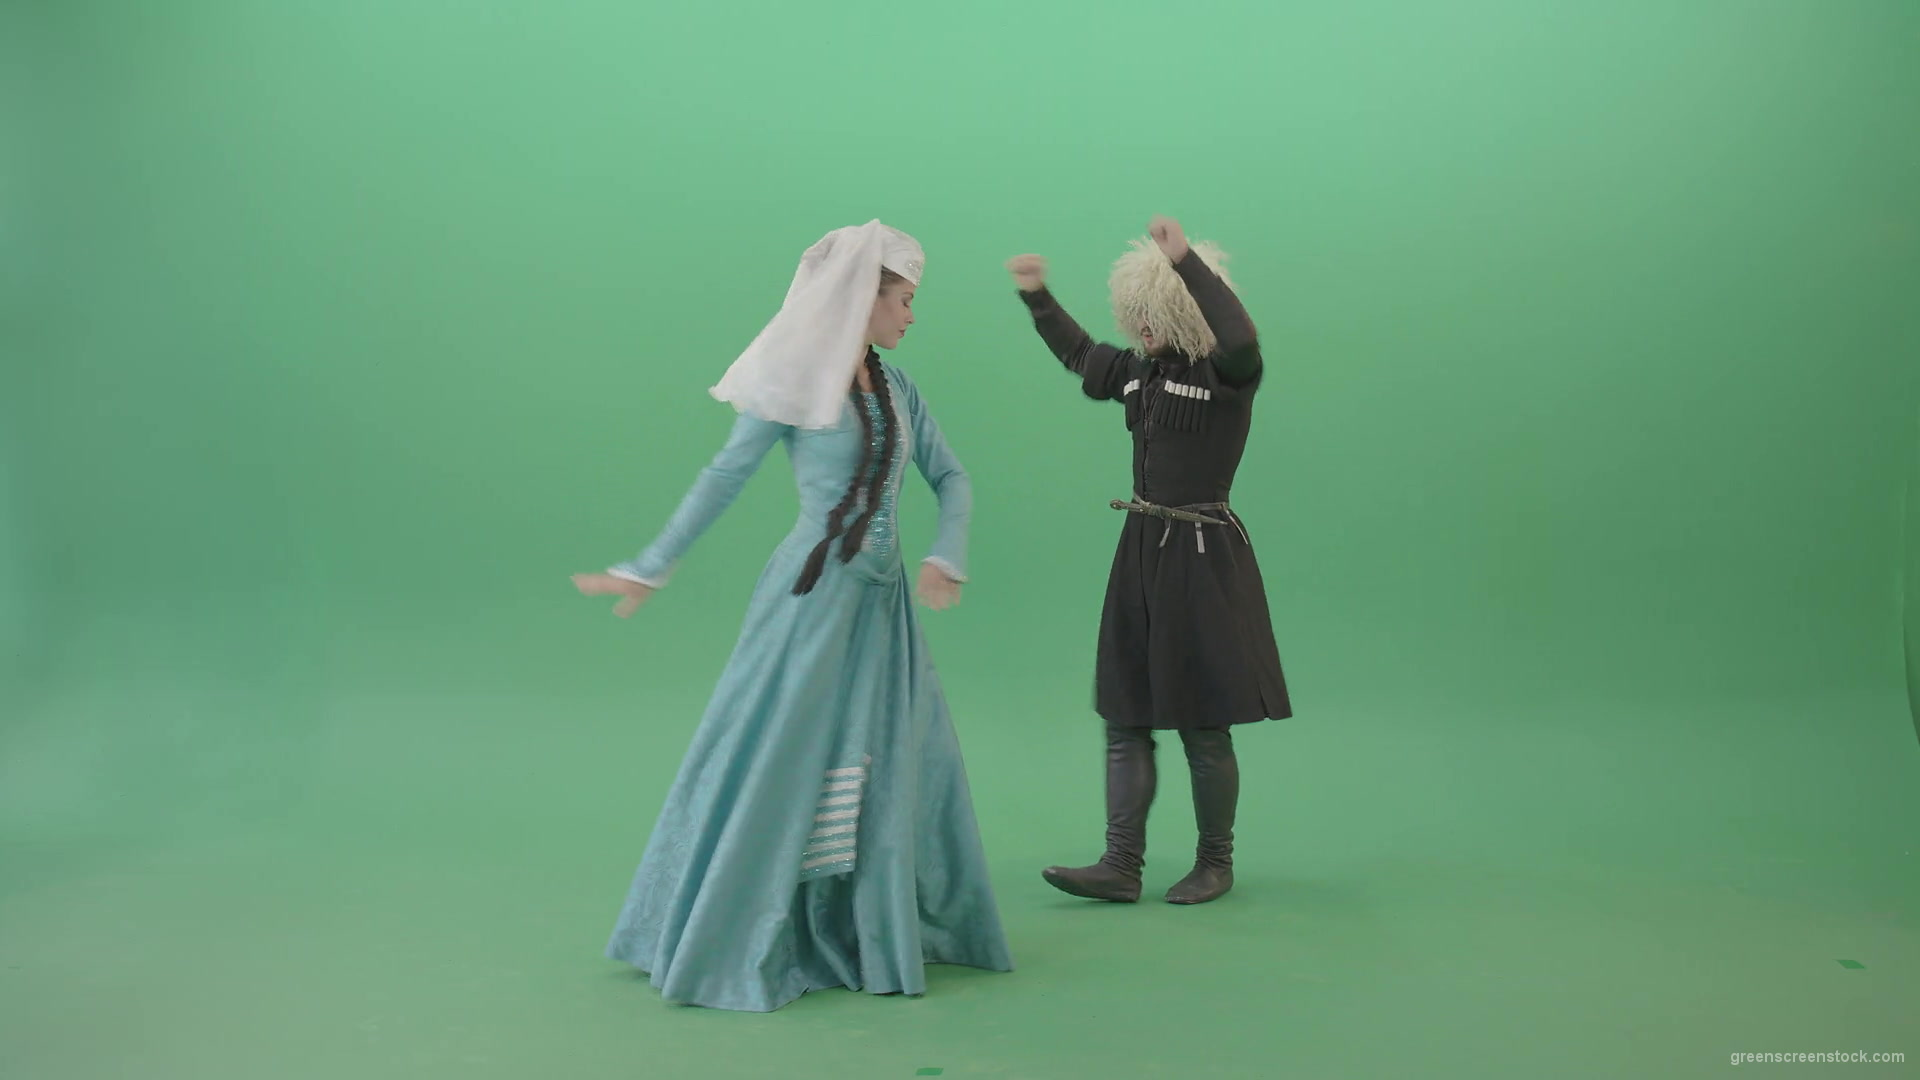 Party-maker-Georgian-Folk-Dance-with-man-and-woman-on-green-screen-4K-Video-Footage-1920_005 Green Screen Stock